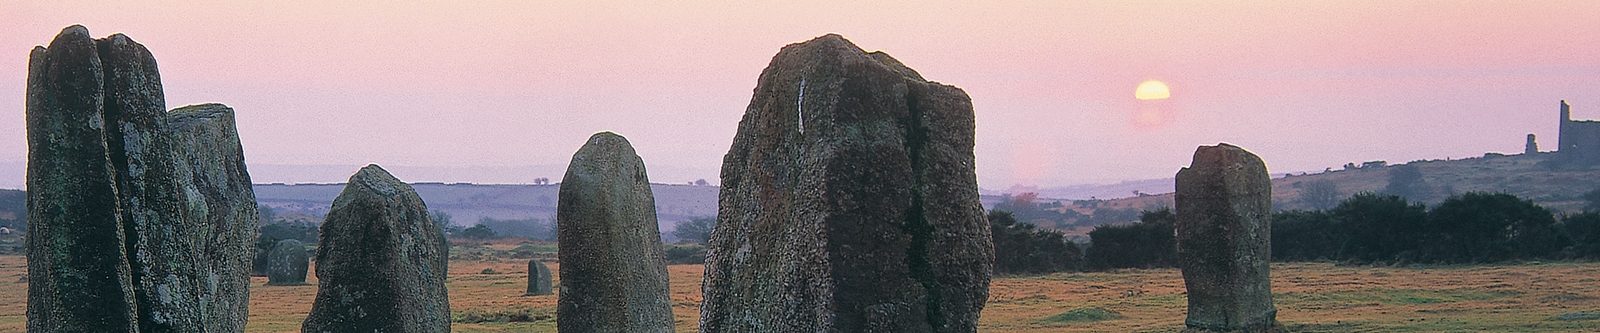 stone circles at sunset in St Cleer